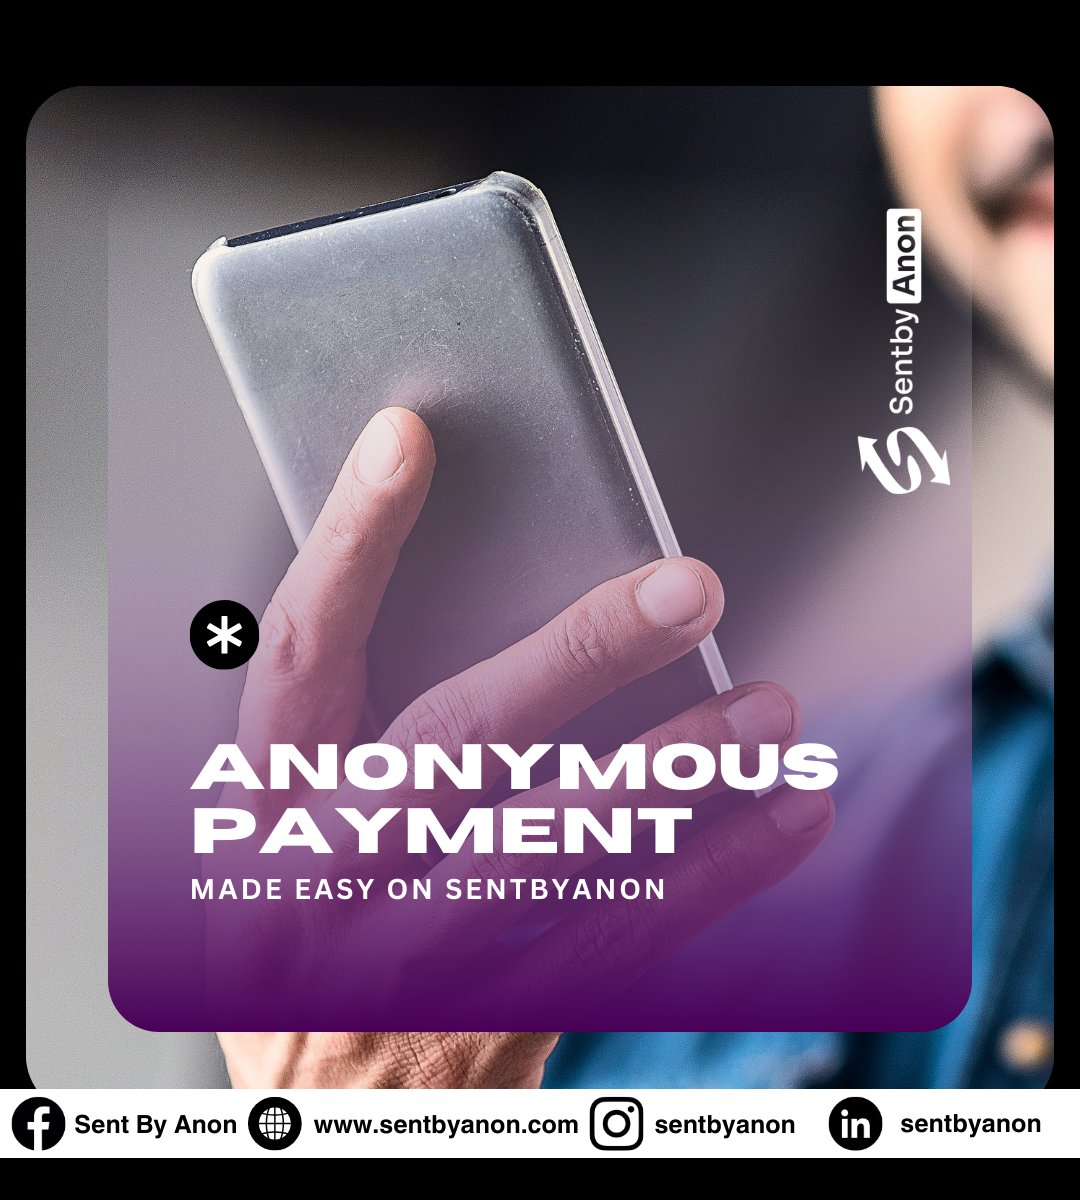 Send payments anonymously at your own convenience on sentbyanon.com

#paymentprocessing

#merchantservices

#paymentsolutions

#creditcardprocessing

#business

#payments

#smallbusiness

#pos

#pointofsale

#possystem

#ecommerce

#paymentgateway

#mobilepayments